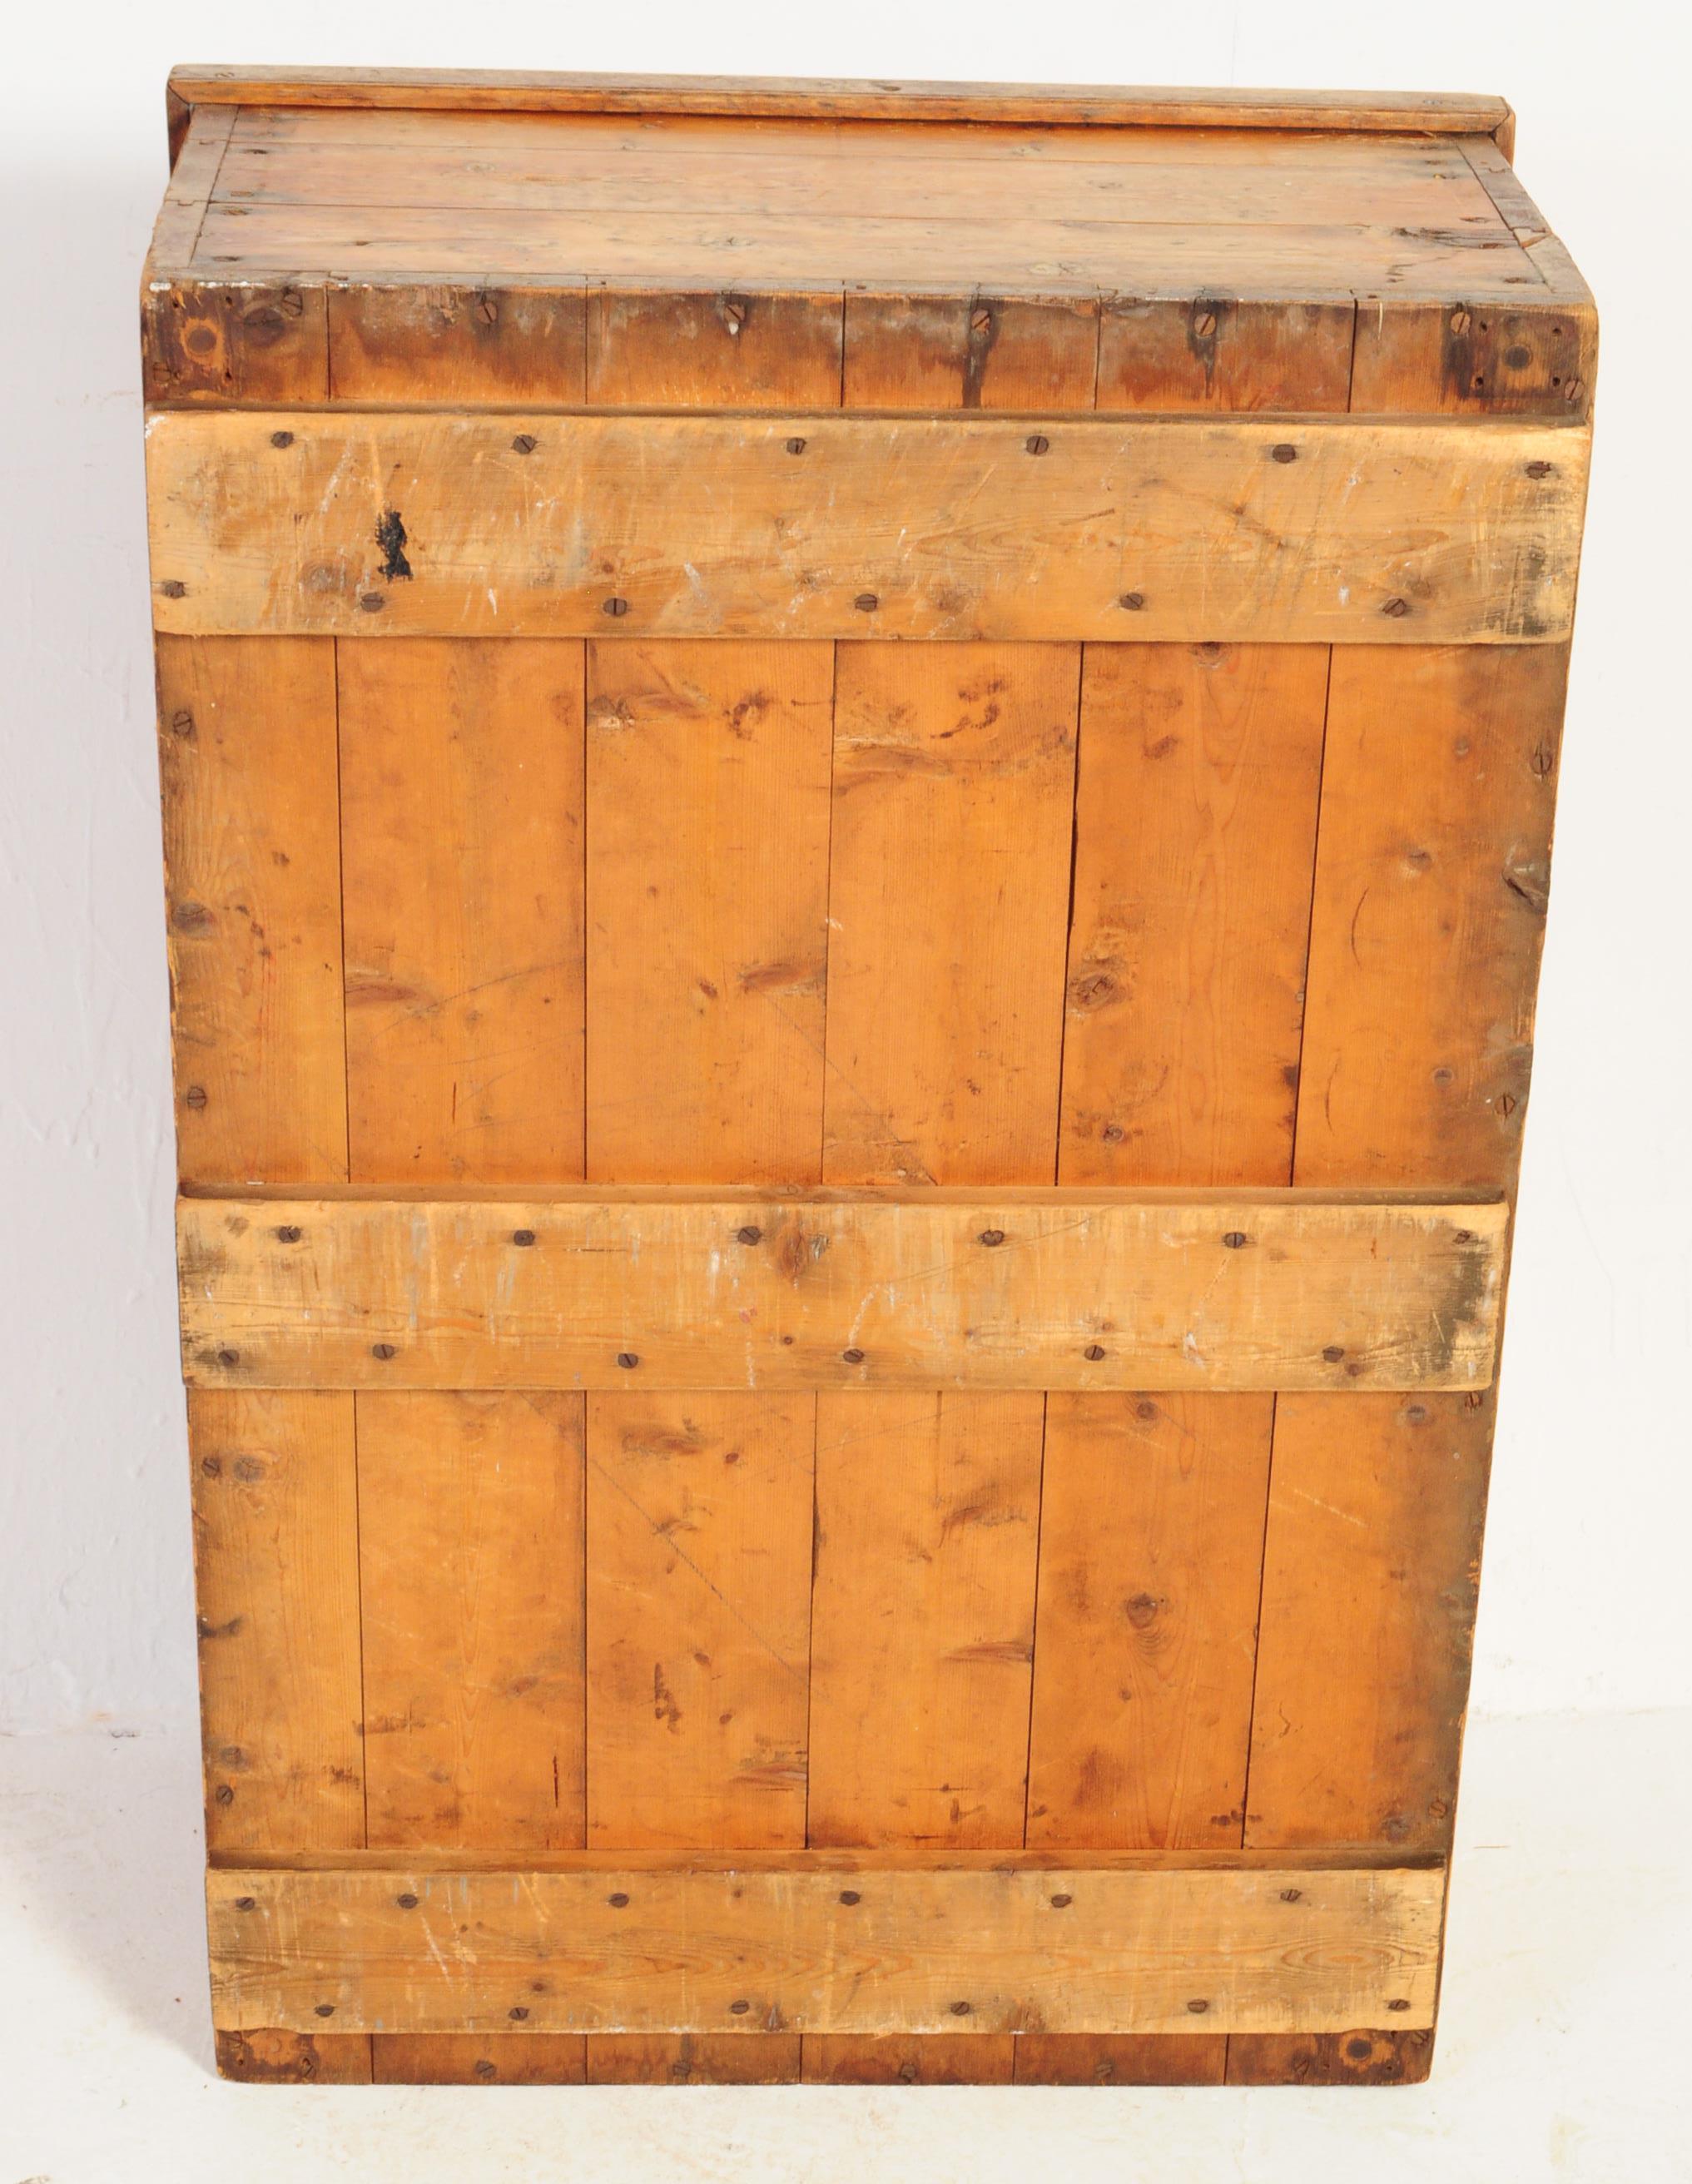 LARGE EARLY 20TH CENTURY PINE CHEST / COFFEE TABLE - Image 3 of 3